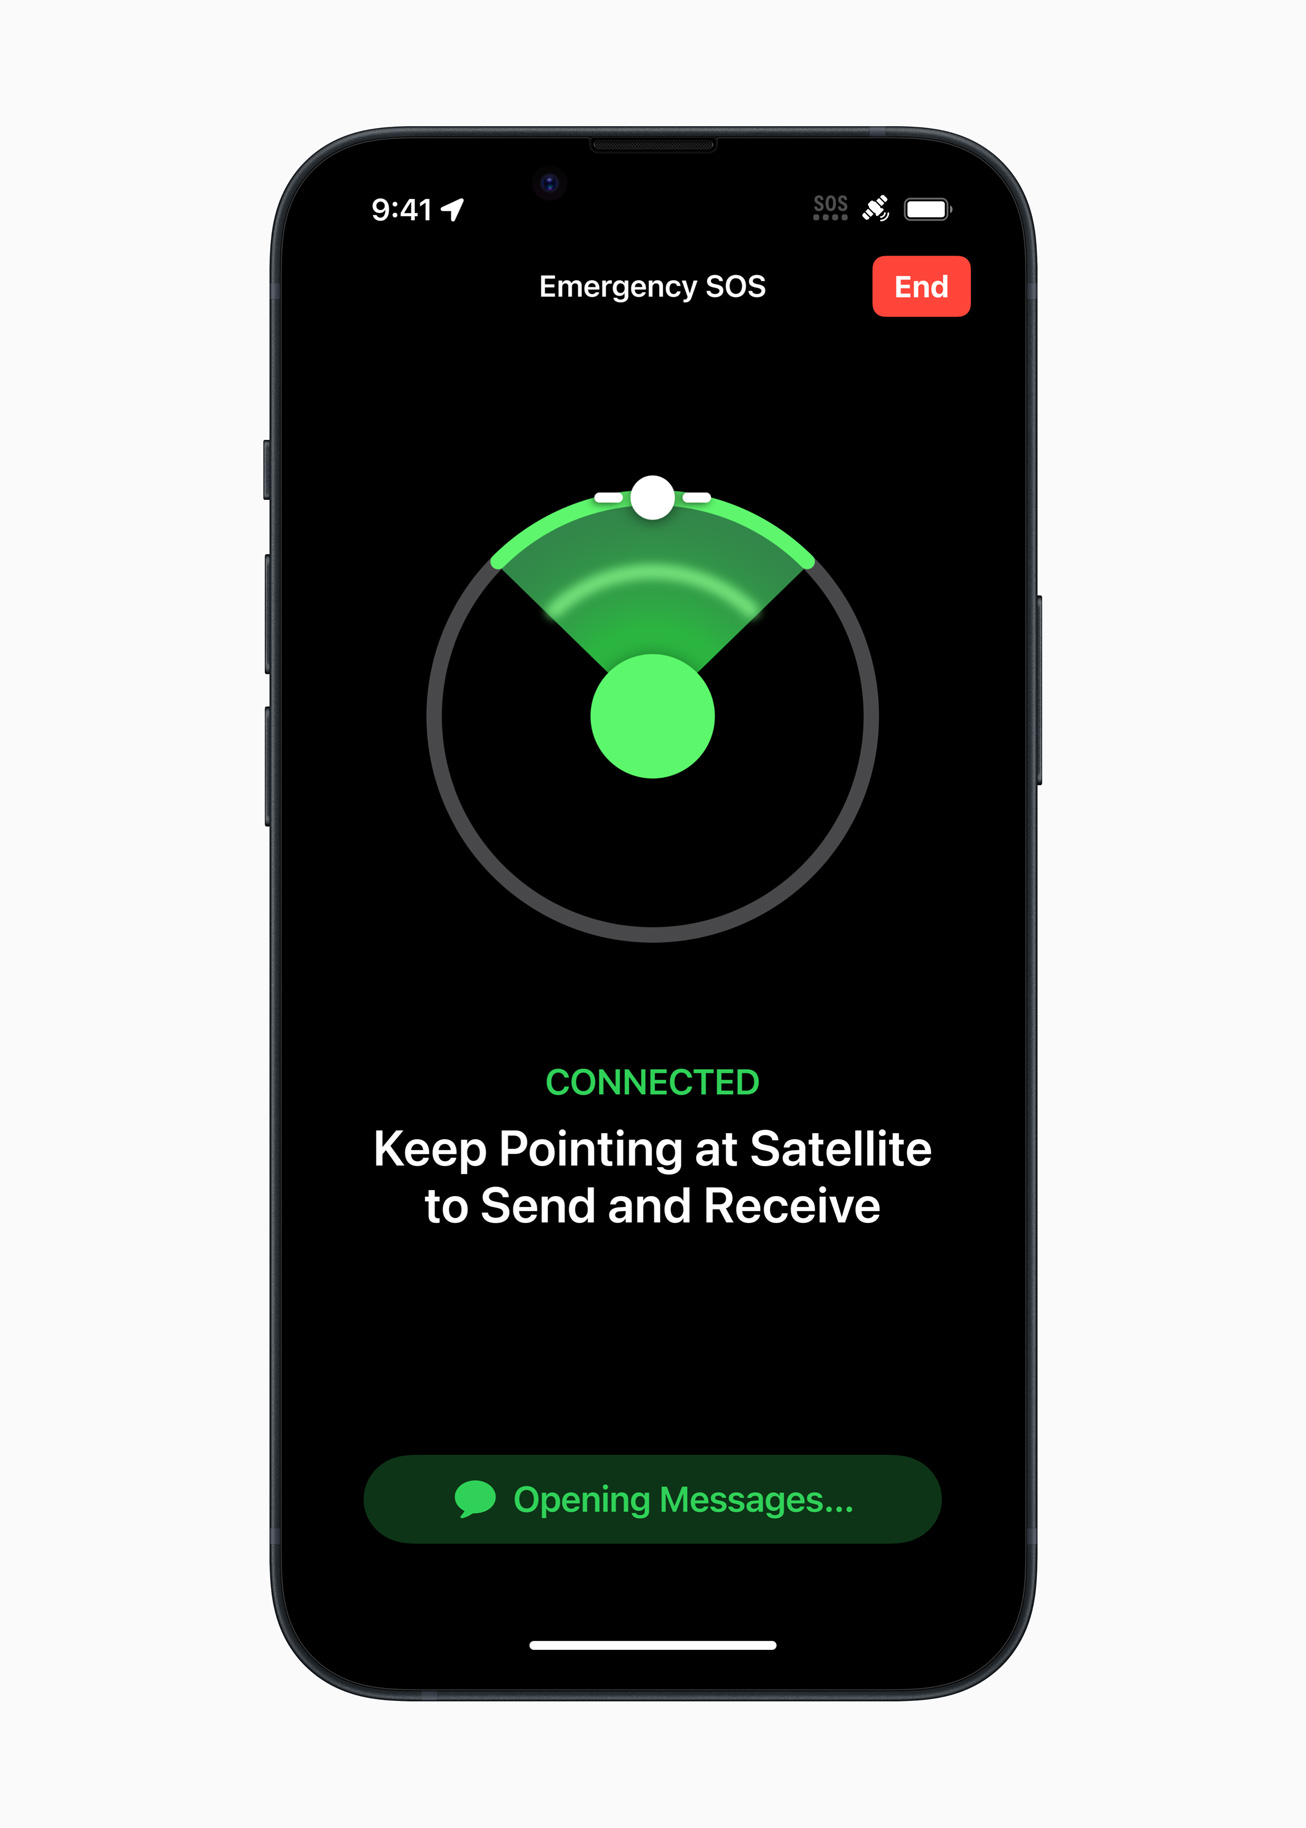 An image of an Apple iPhone displaying an emergency SOS phone call, with prompts for users to point the phone at a satellite